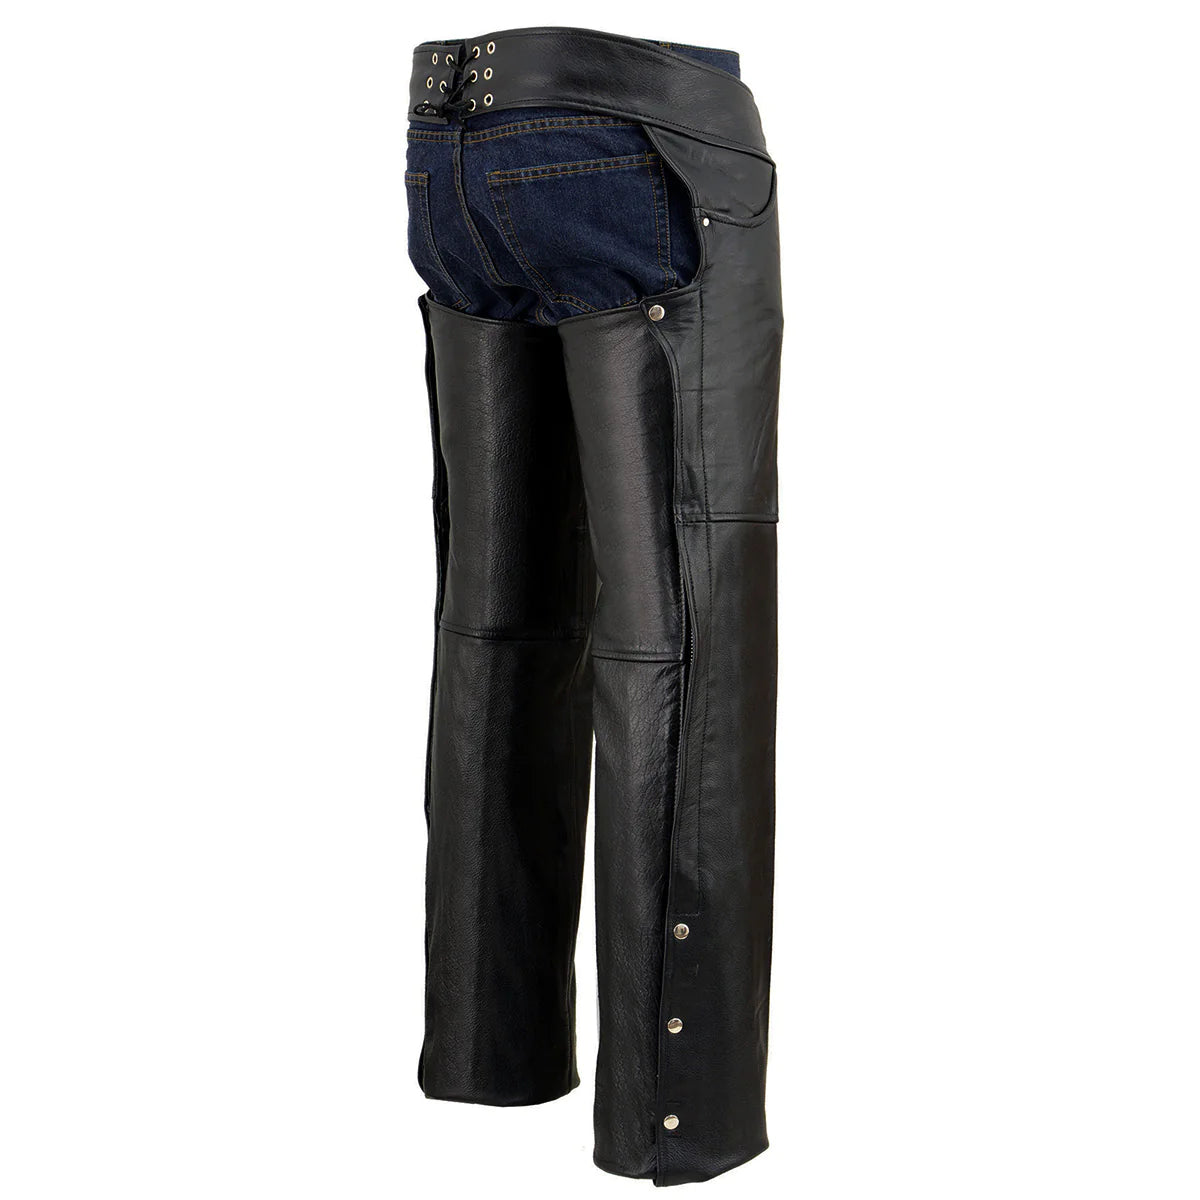 Men's Black Classic Leather Chaps with Jean Pockets